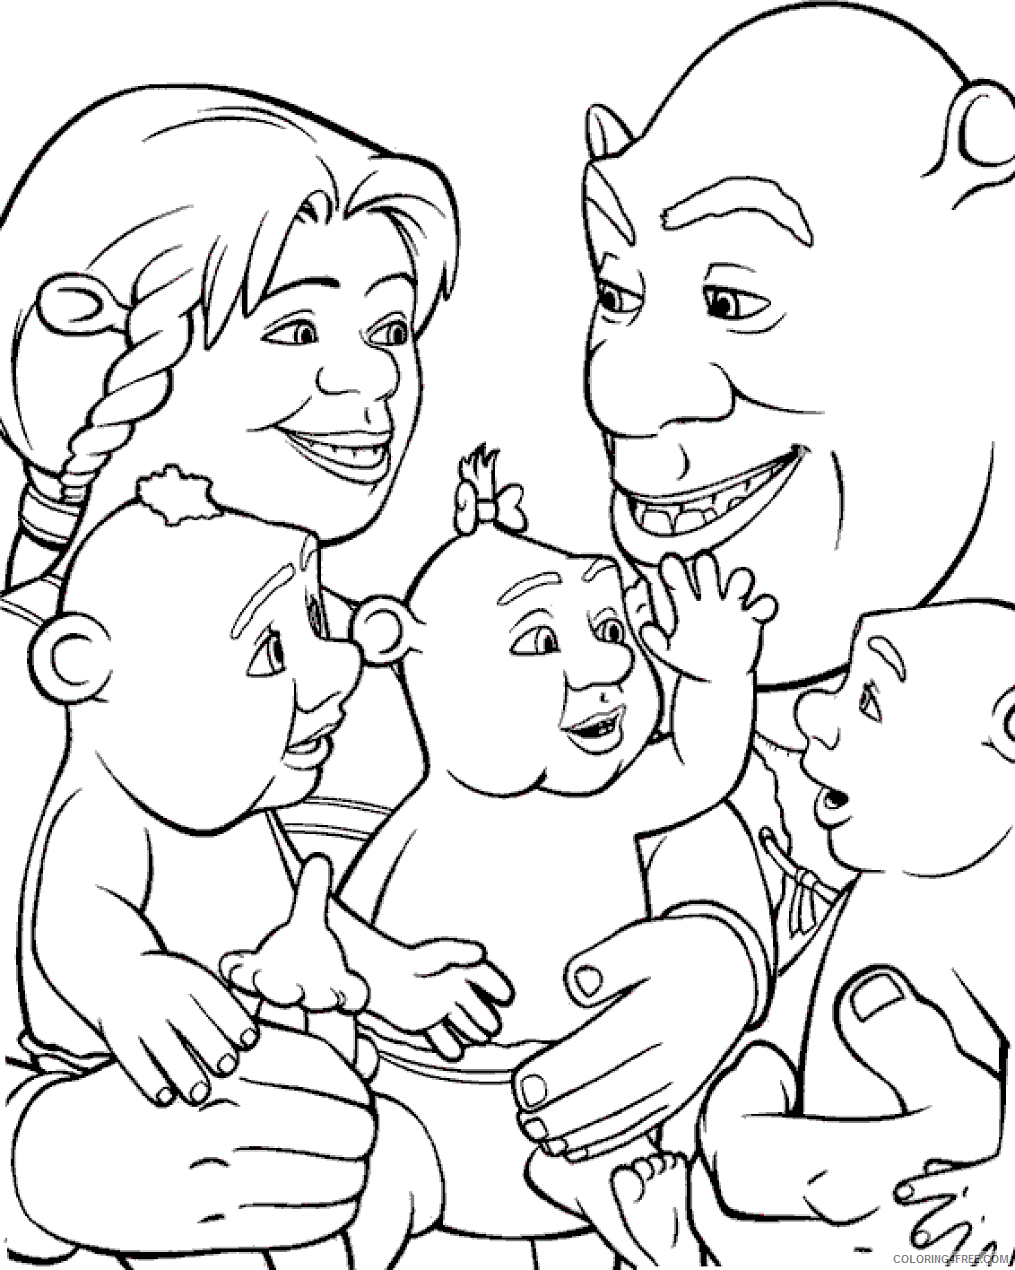 Shrek Coloring Pages Cartoons 1569339256_family_of_shrek a4 Printable 2020 5401 Coloring4free